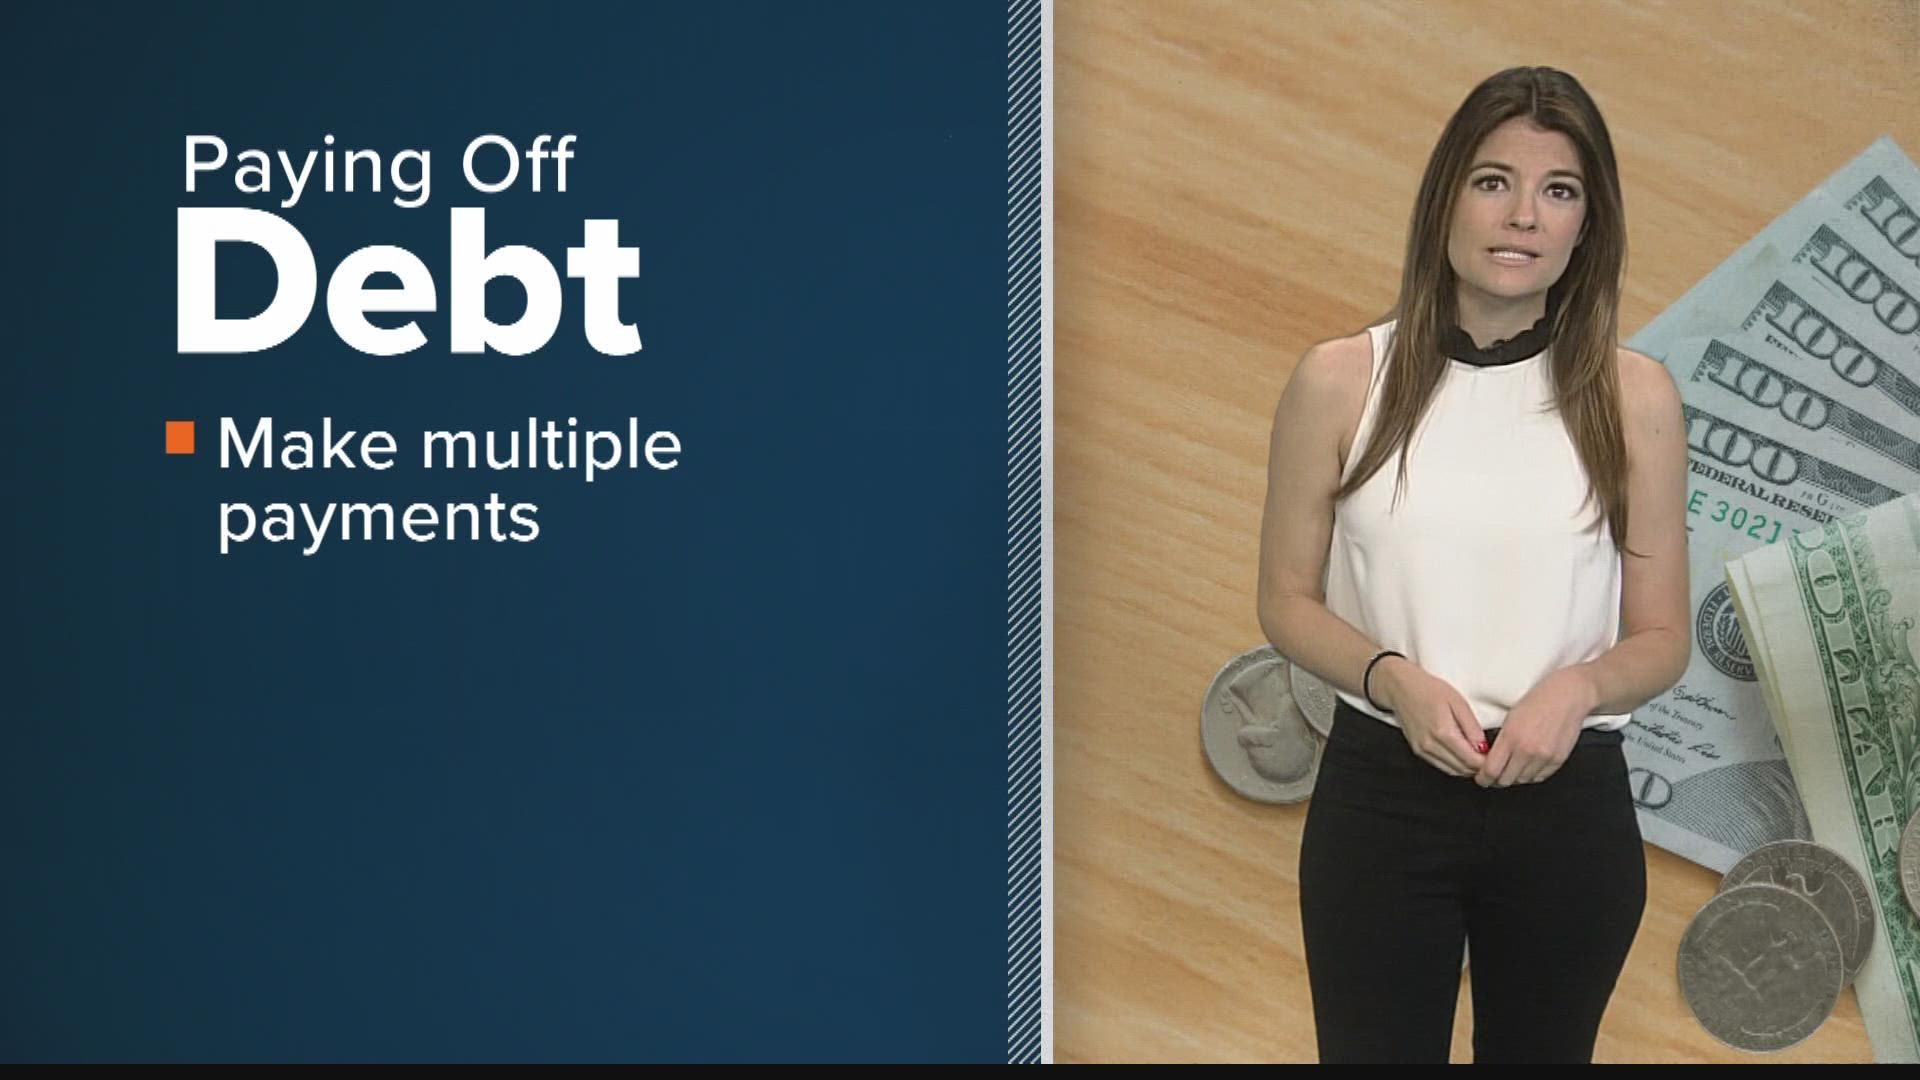 Allison Gormly has your latest insight into how to handle credit card debt.